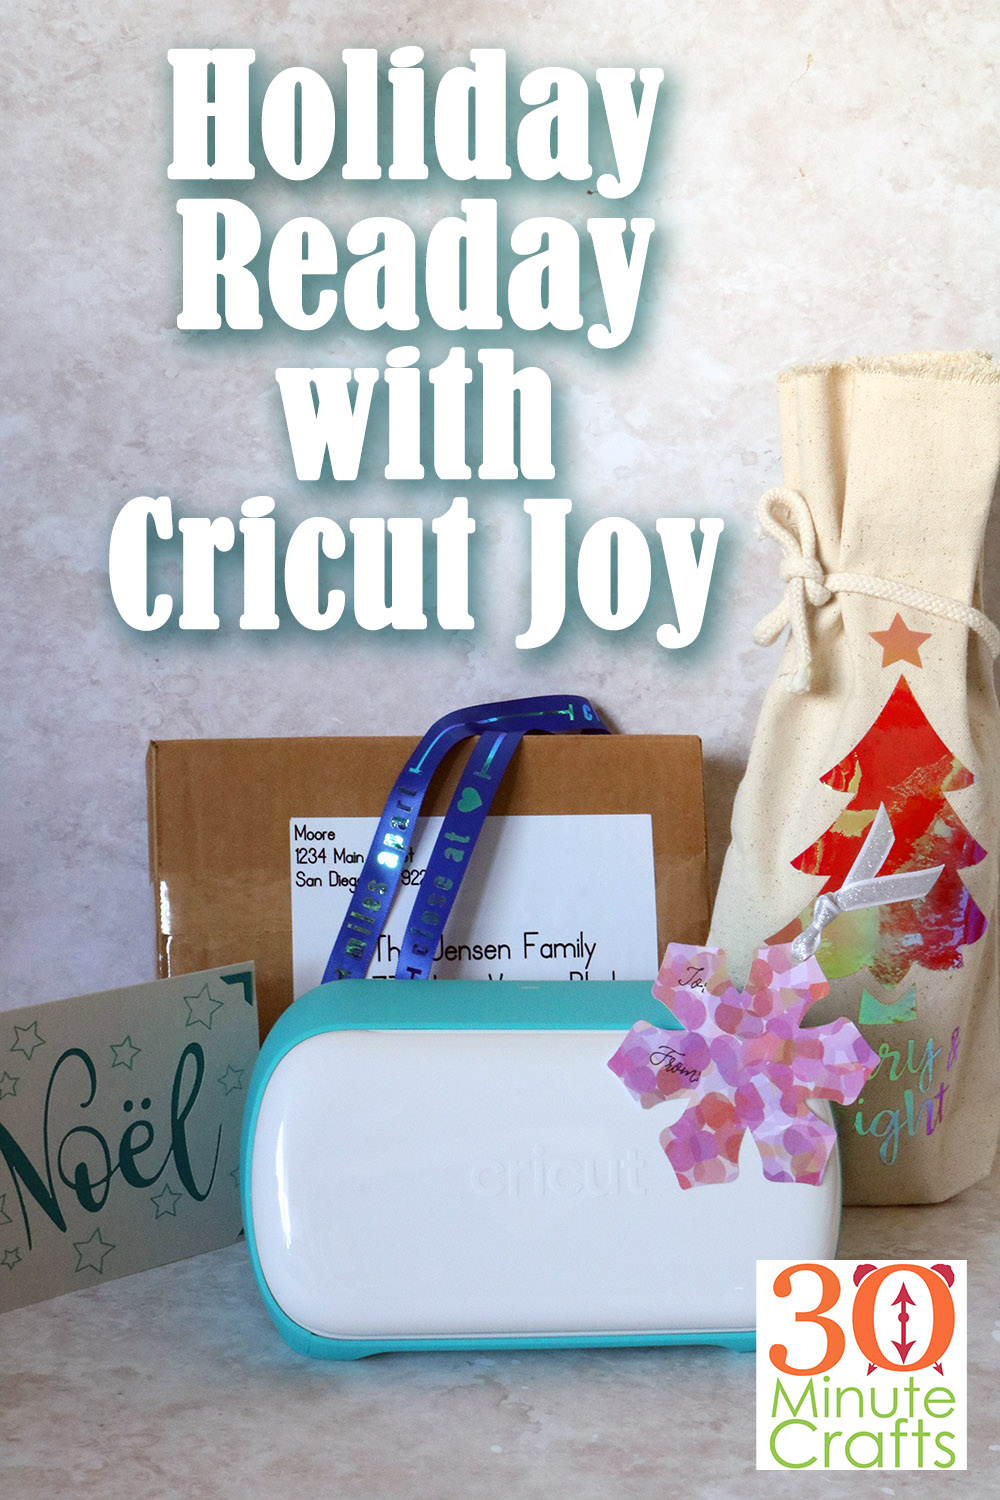 Kitchen Holiday Gifts with Cricut Joy - Crafting in the Rain